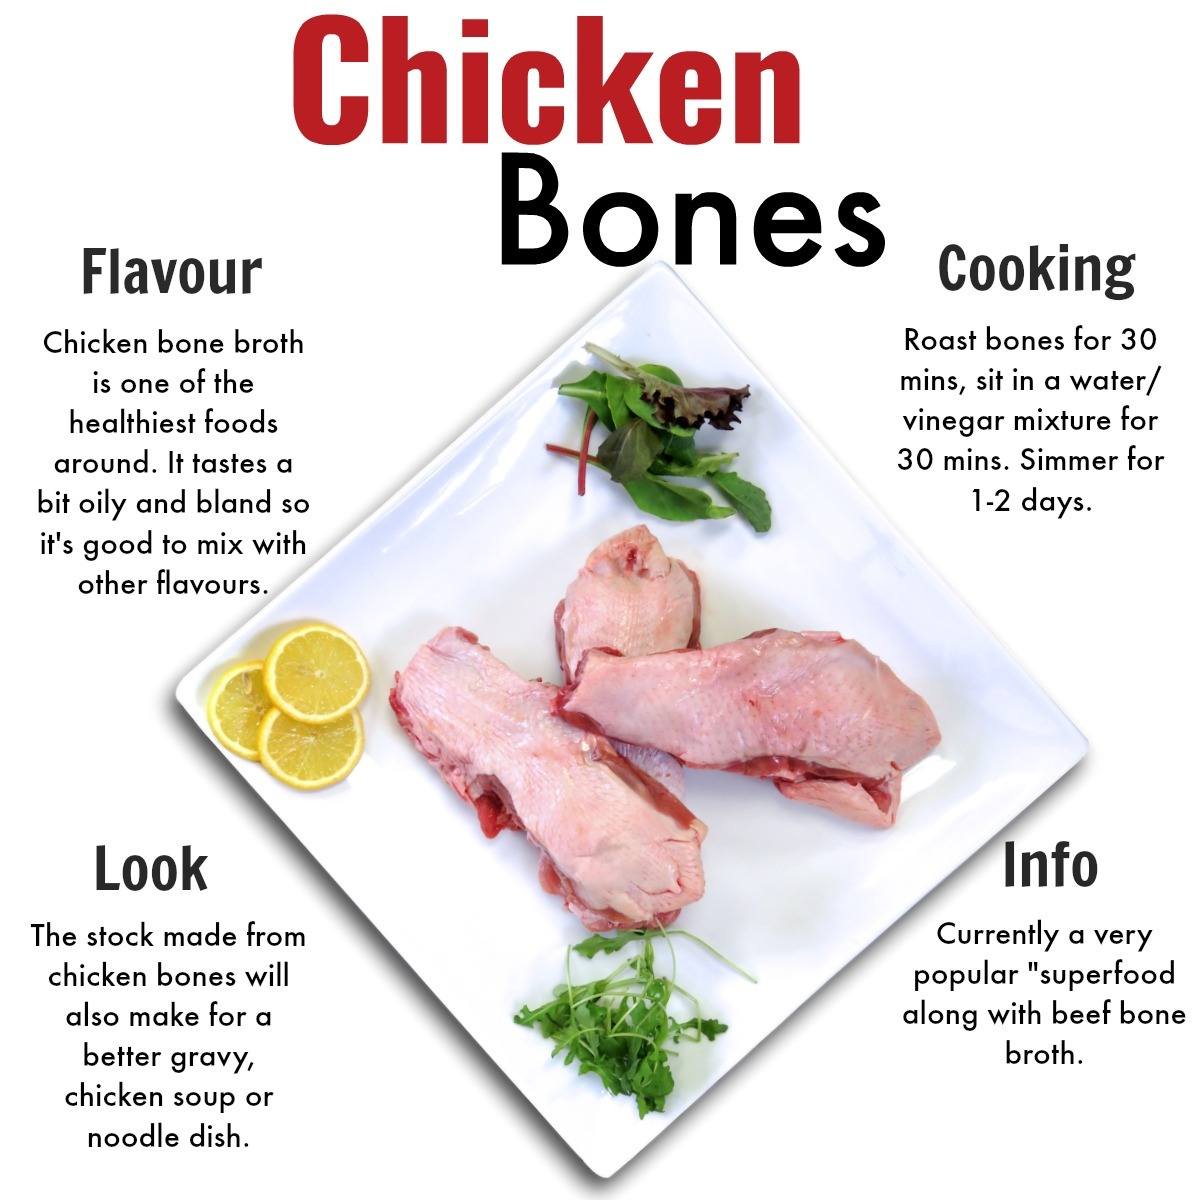 Affordable Chicken delivery near me breast thigh drumstick wings whole chicken - Nutrafarms - Chicken Bones